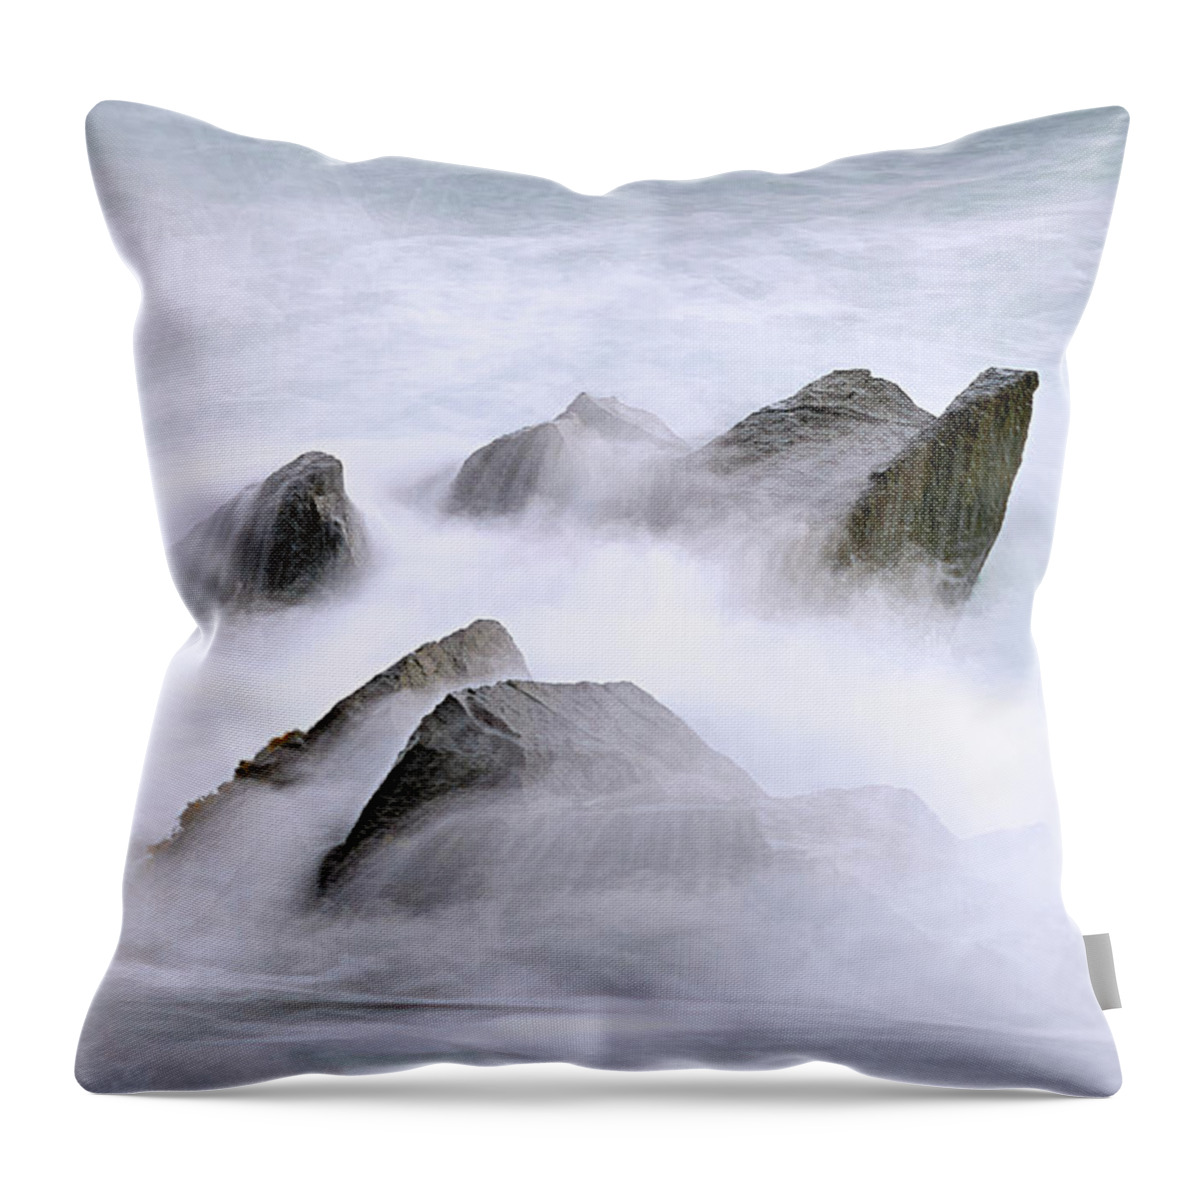 Velvet Surf Throw Pillow featuring the photograph Velvet Surf by Marty Saccone